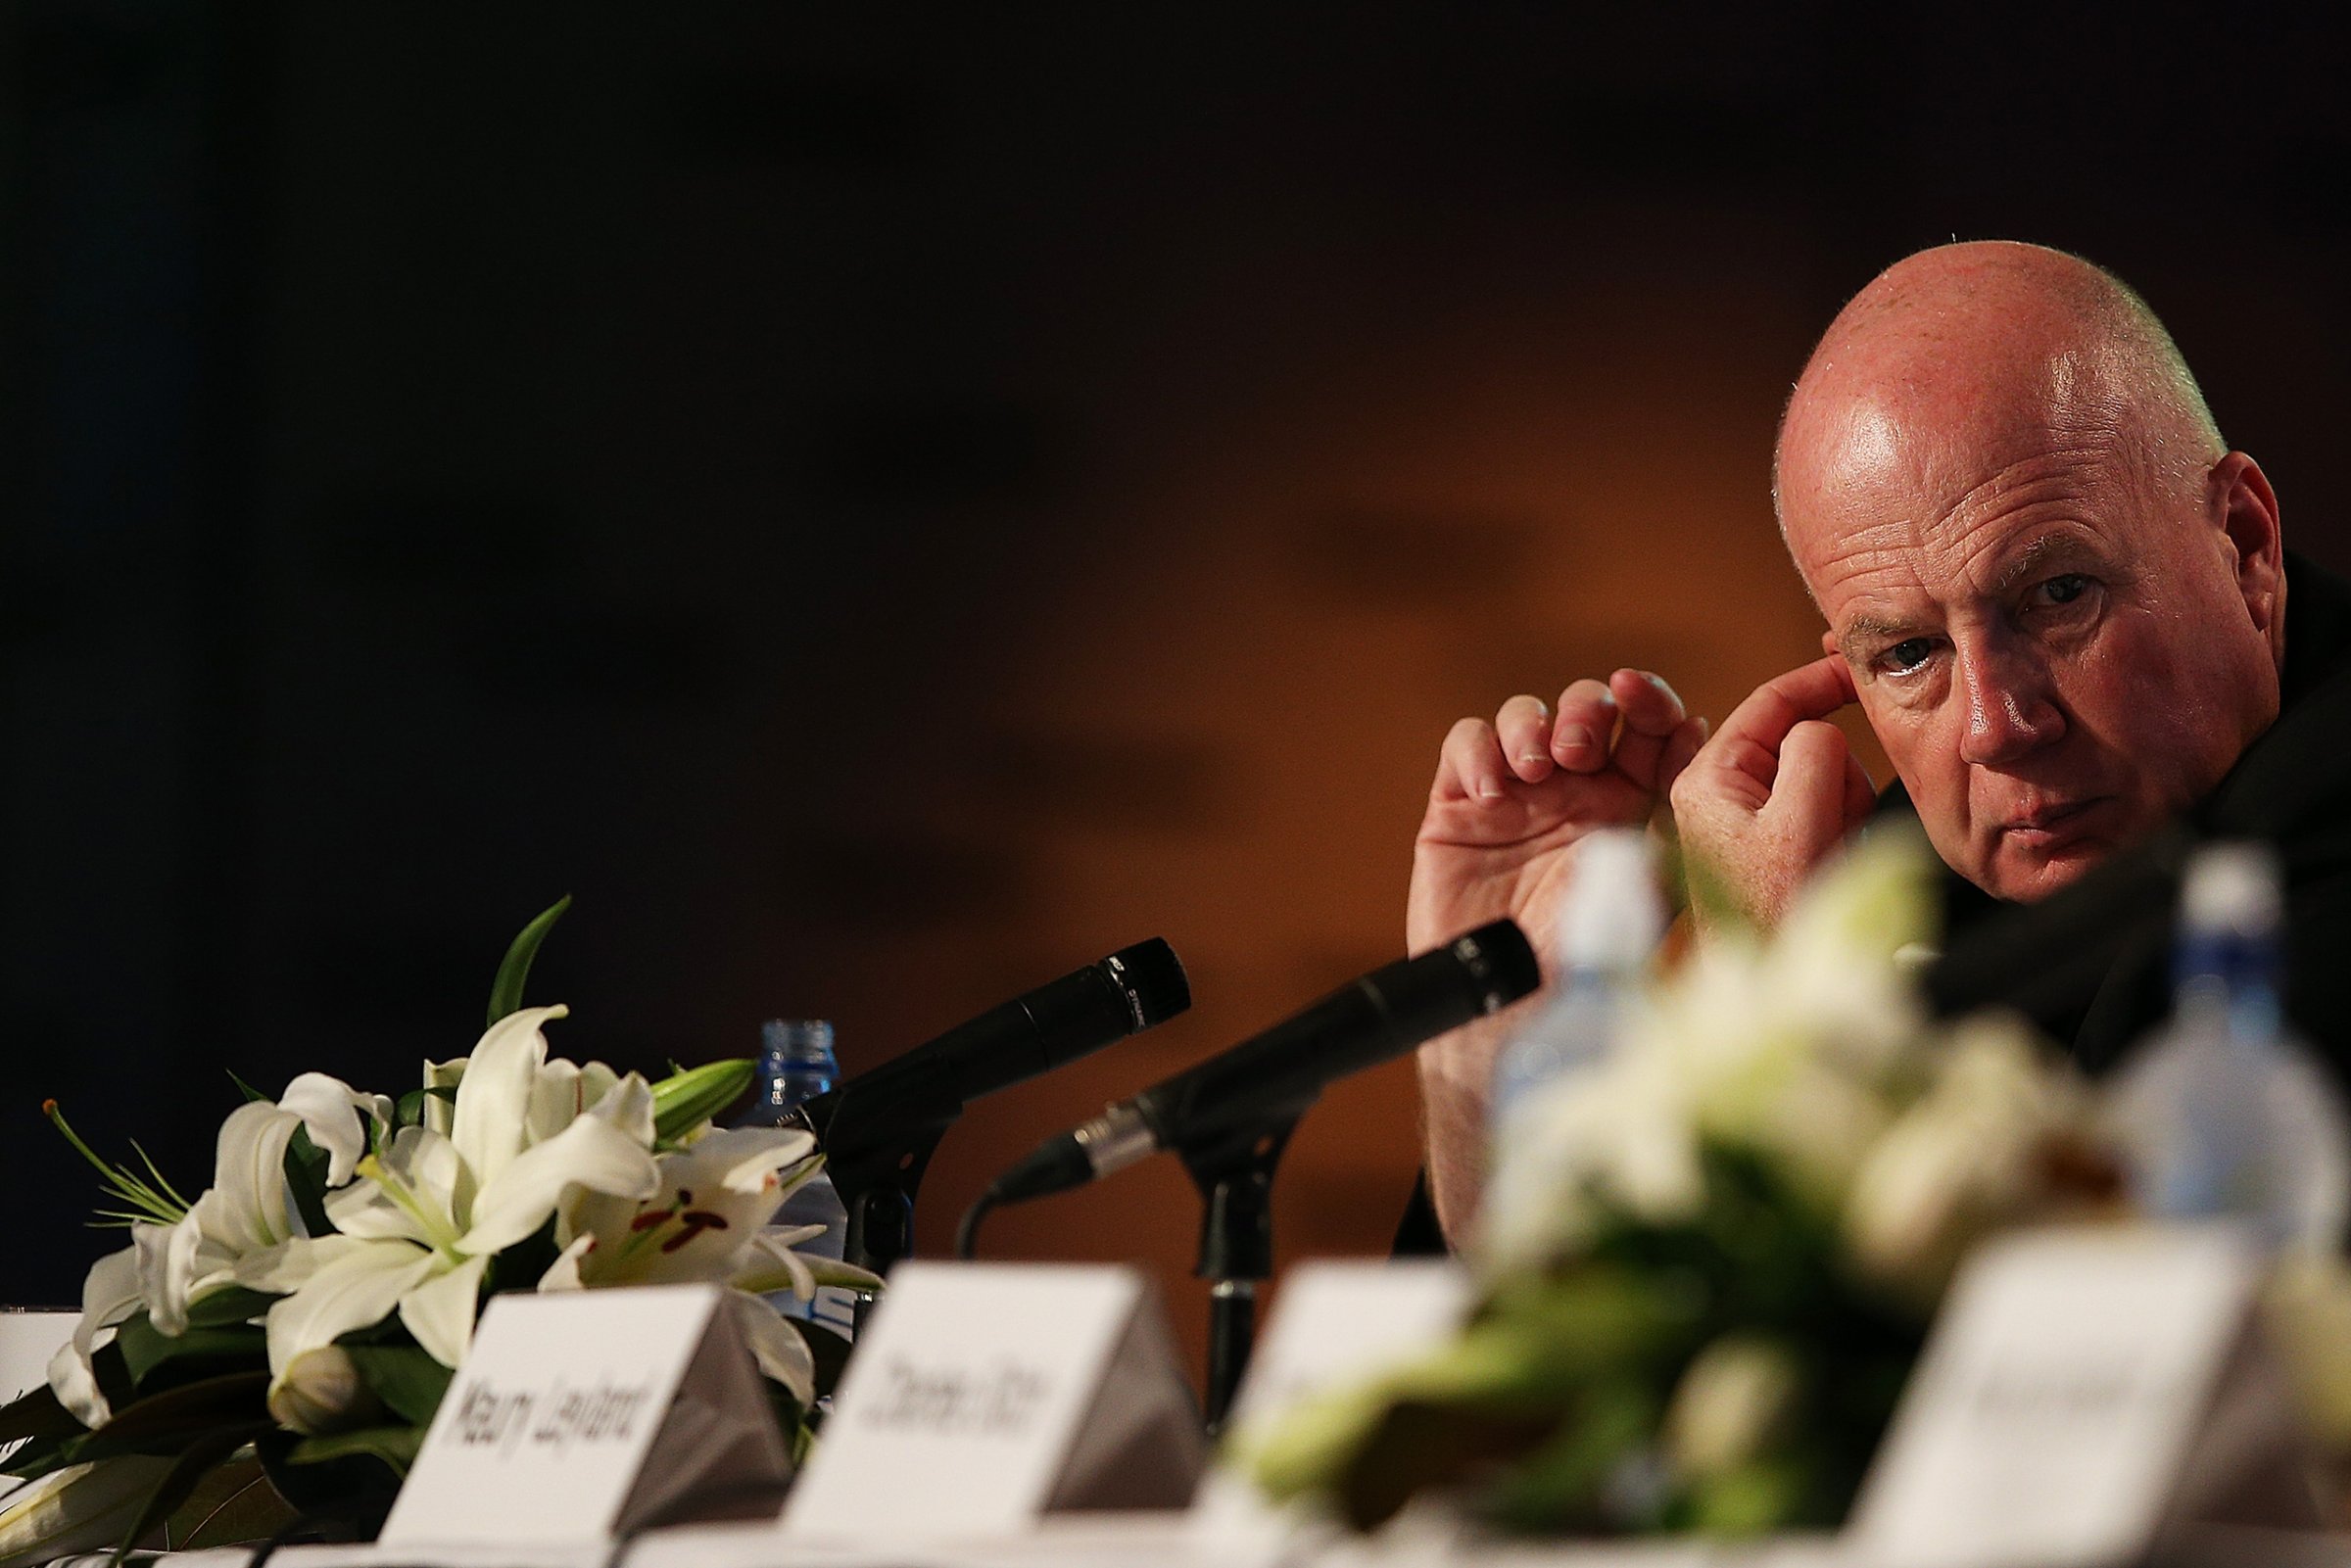 Board member Kevin Roberts attends the Telecom annual general meeting in Auckland, New Zealand on Sept. 28, 2012.